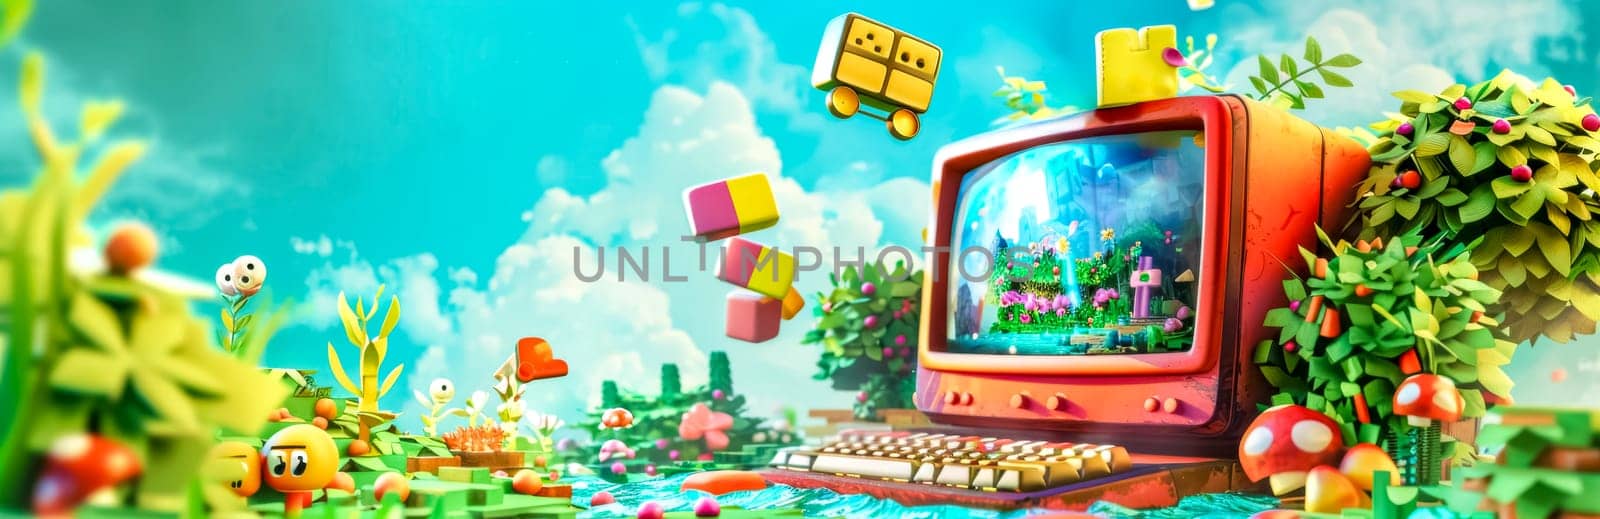 Colorful fantasy panorama with a vintage tv and video game elements against a blue backdrop